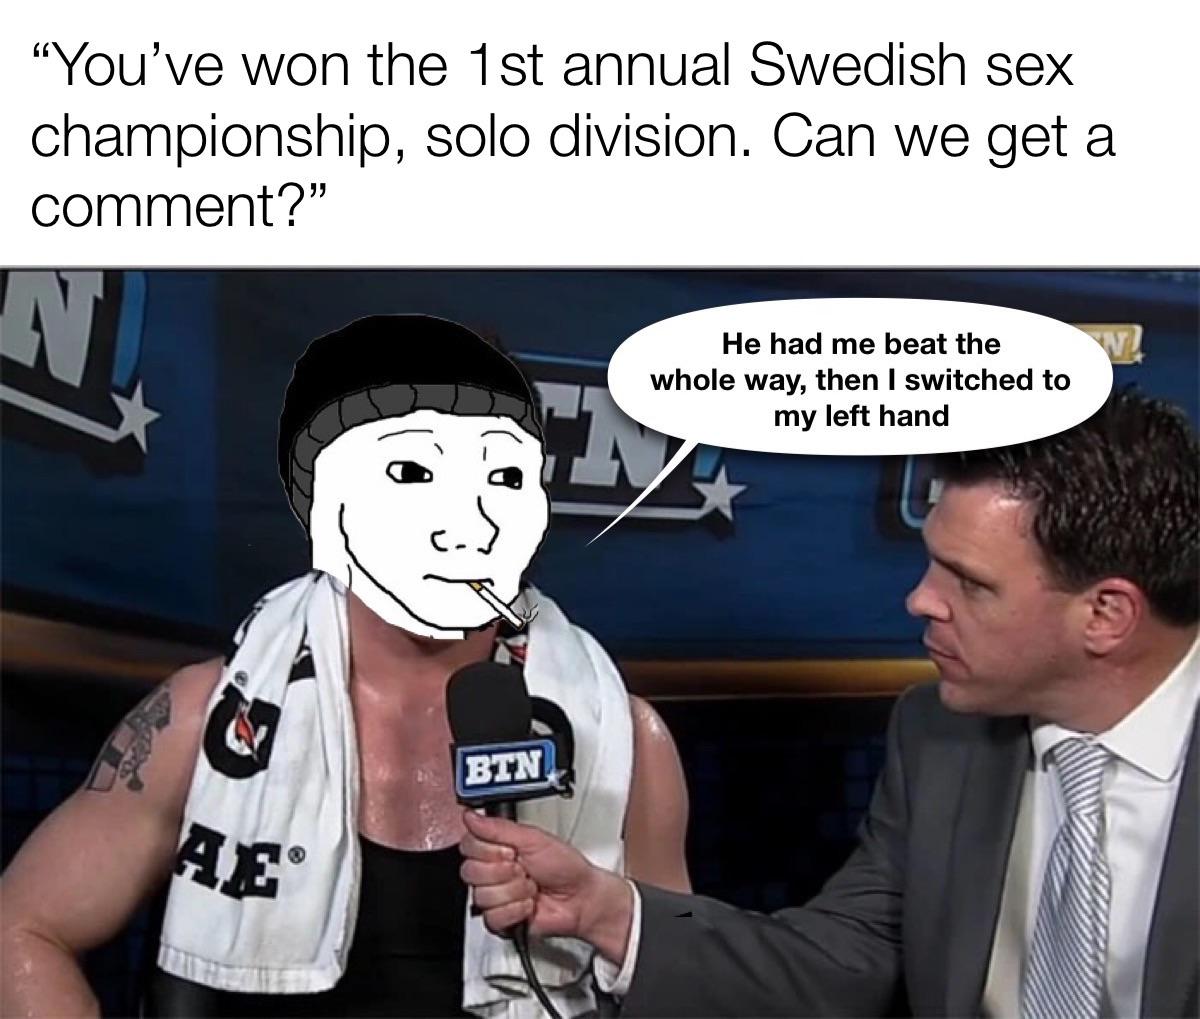 dank memes - cartoon - "You've won the 1st annual Swedish sex solo division. Can we get a championship, comment?" Ni Ae Btn He had me beat the whole way, then I switched to my left hand H W